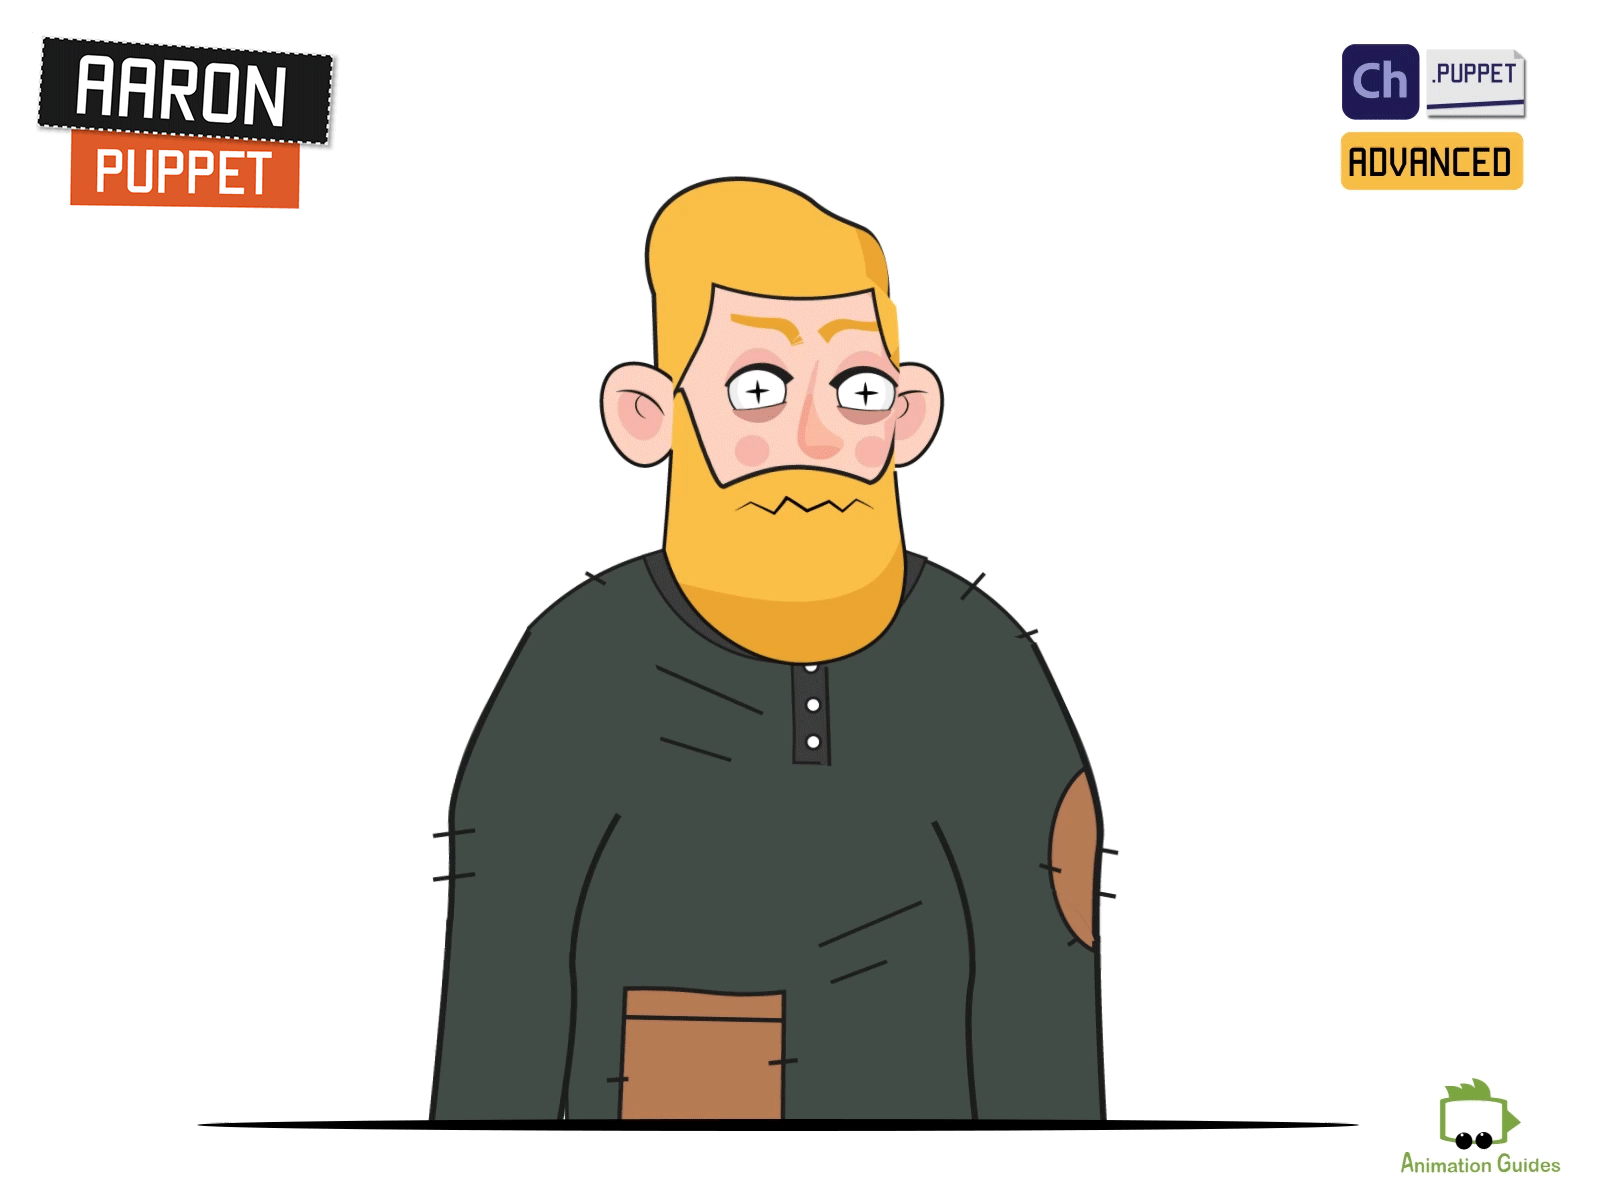 The weird side of Aaron...😶 adobe character animator bearded blonde character character animator character design download face headturn male man puppet